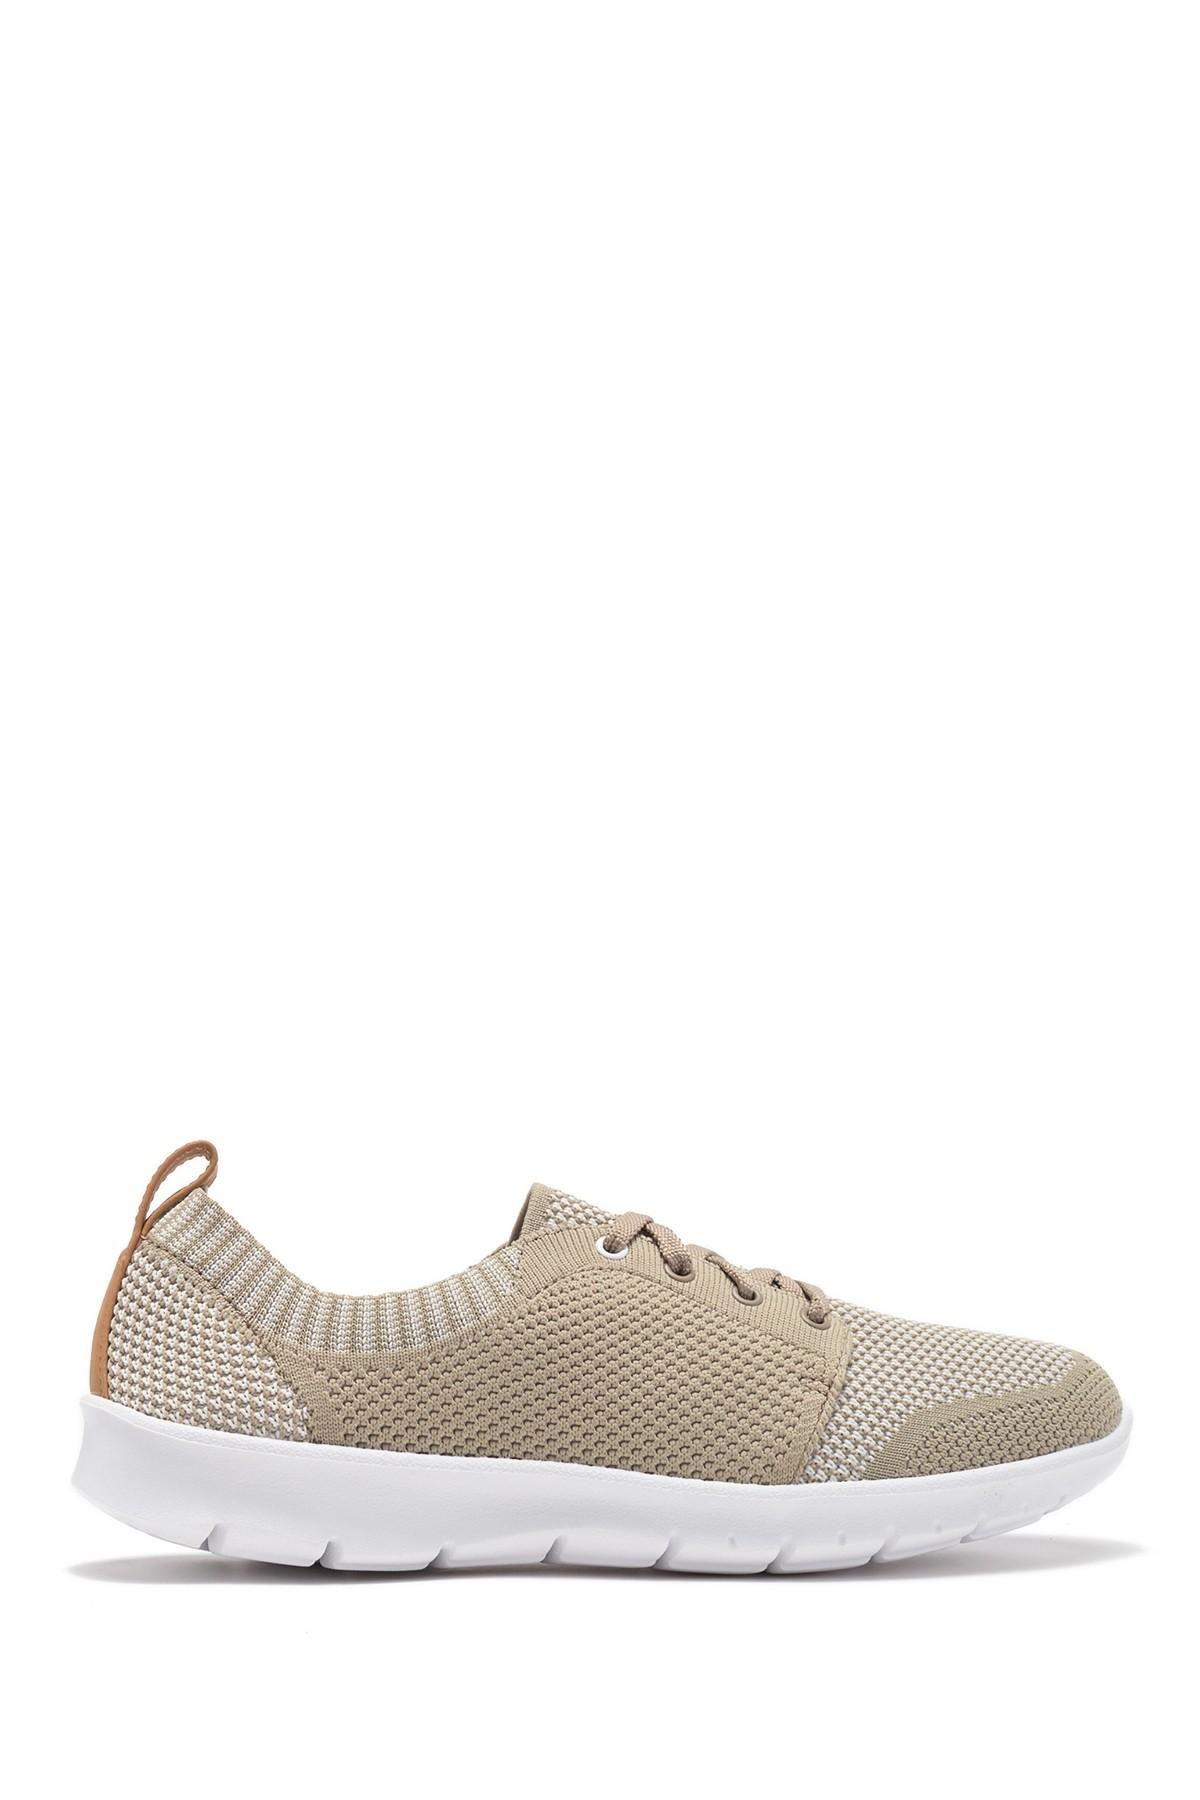 Clarks Lace Step Allena Perforated Sun 